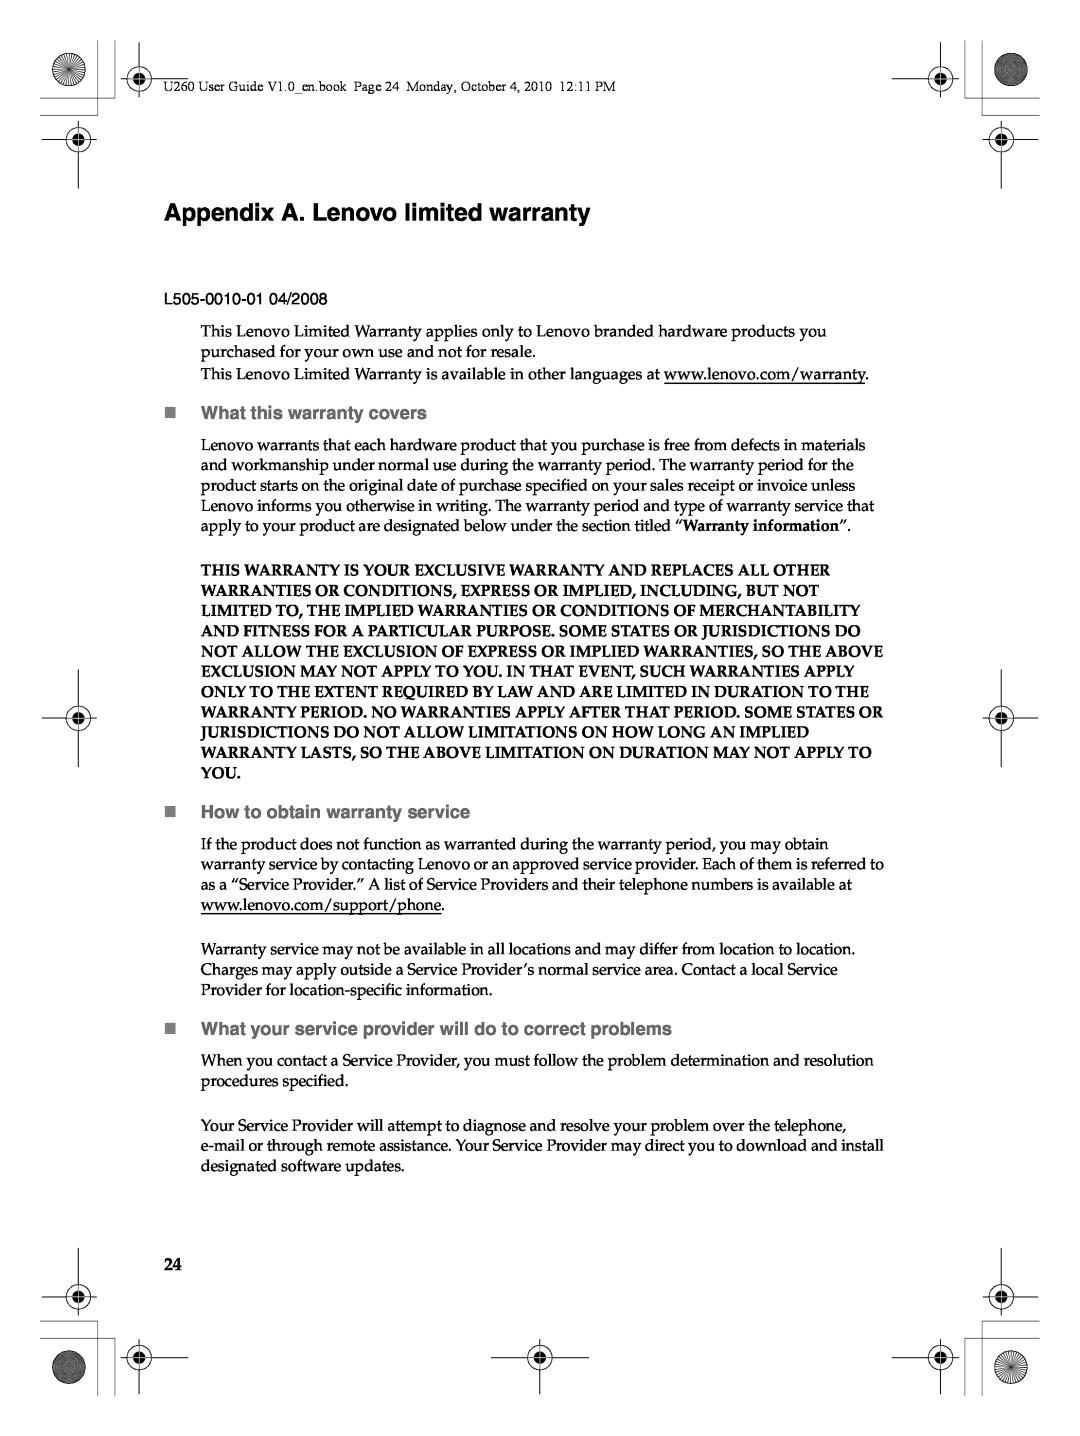 Lenovo U260 manual Appendix A. Lenovo limited warranty, „What this warranty covers, „How to obtain warranty service 